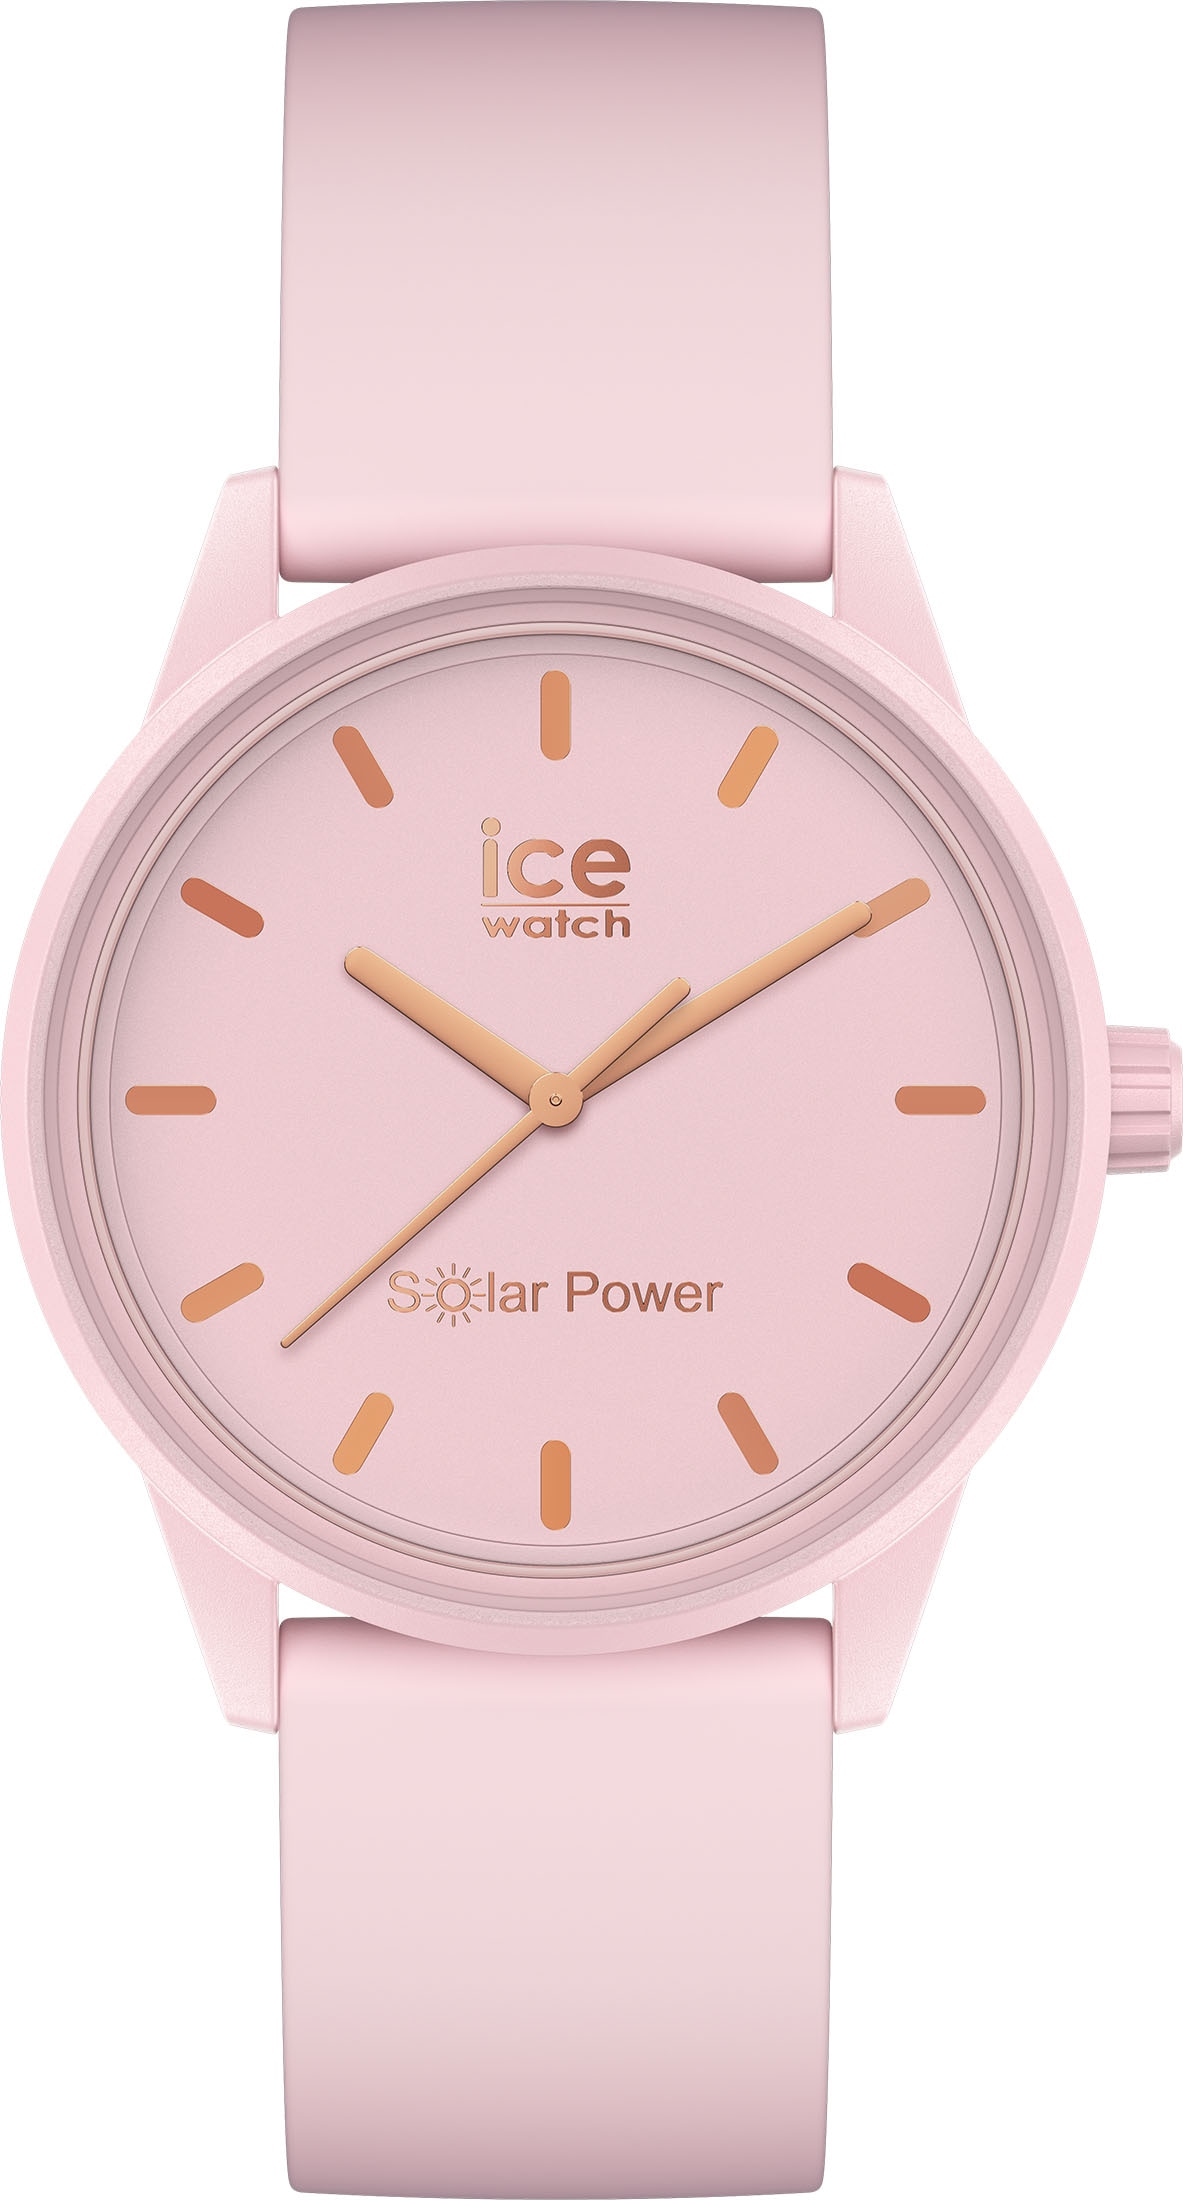 ice-watch Solaruhr »ICE solar power - Pink lady, 018479«